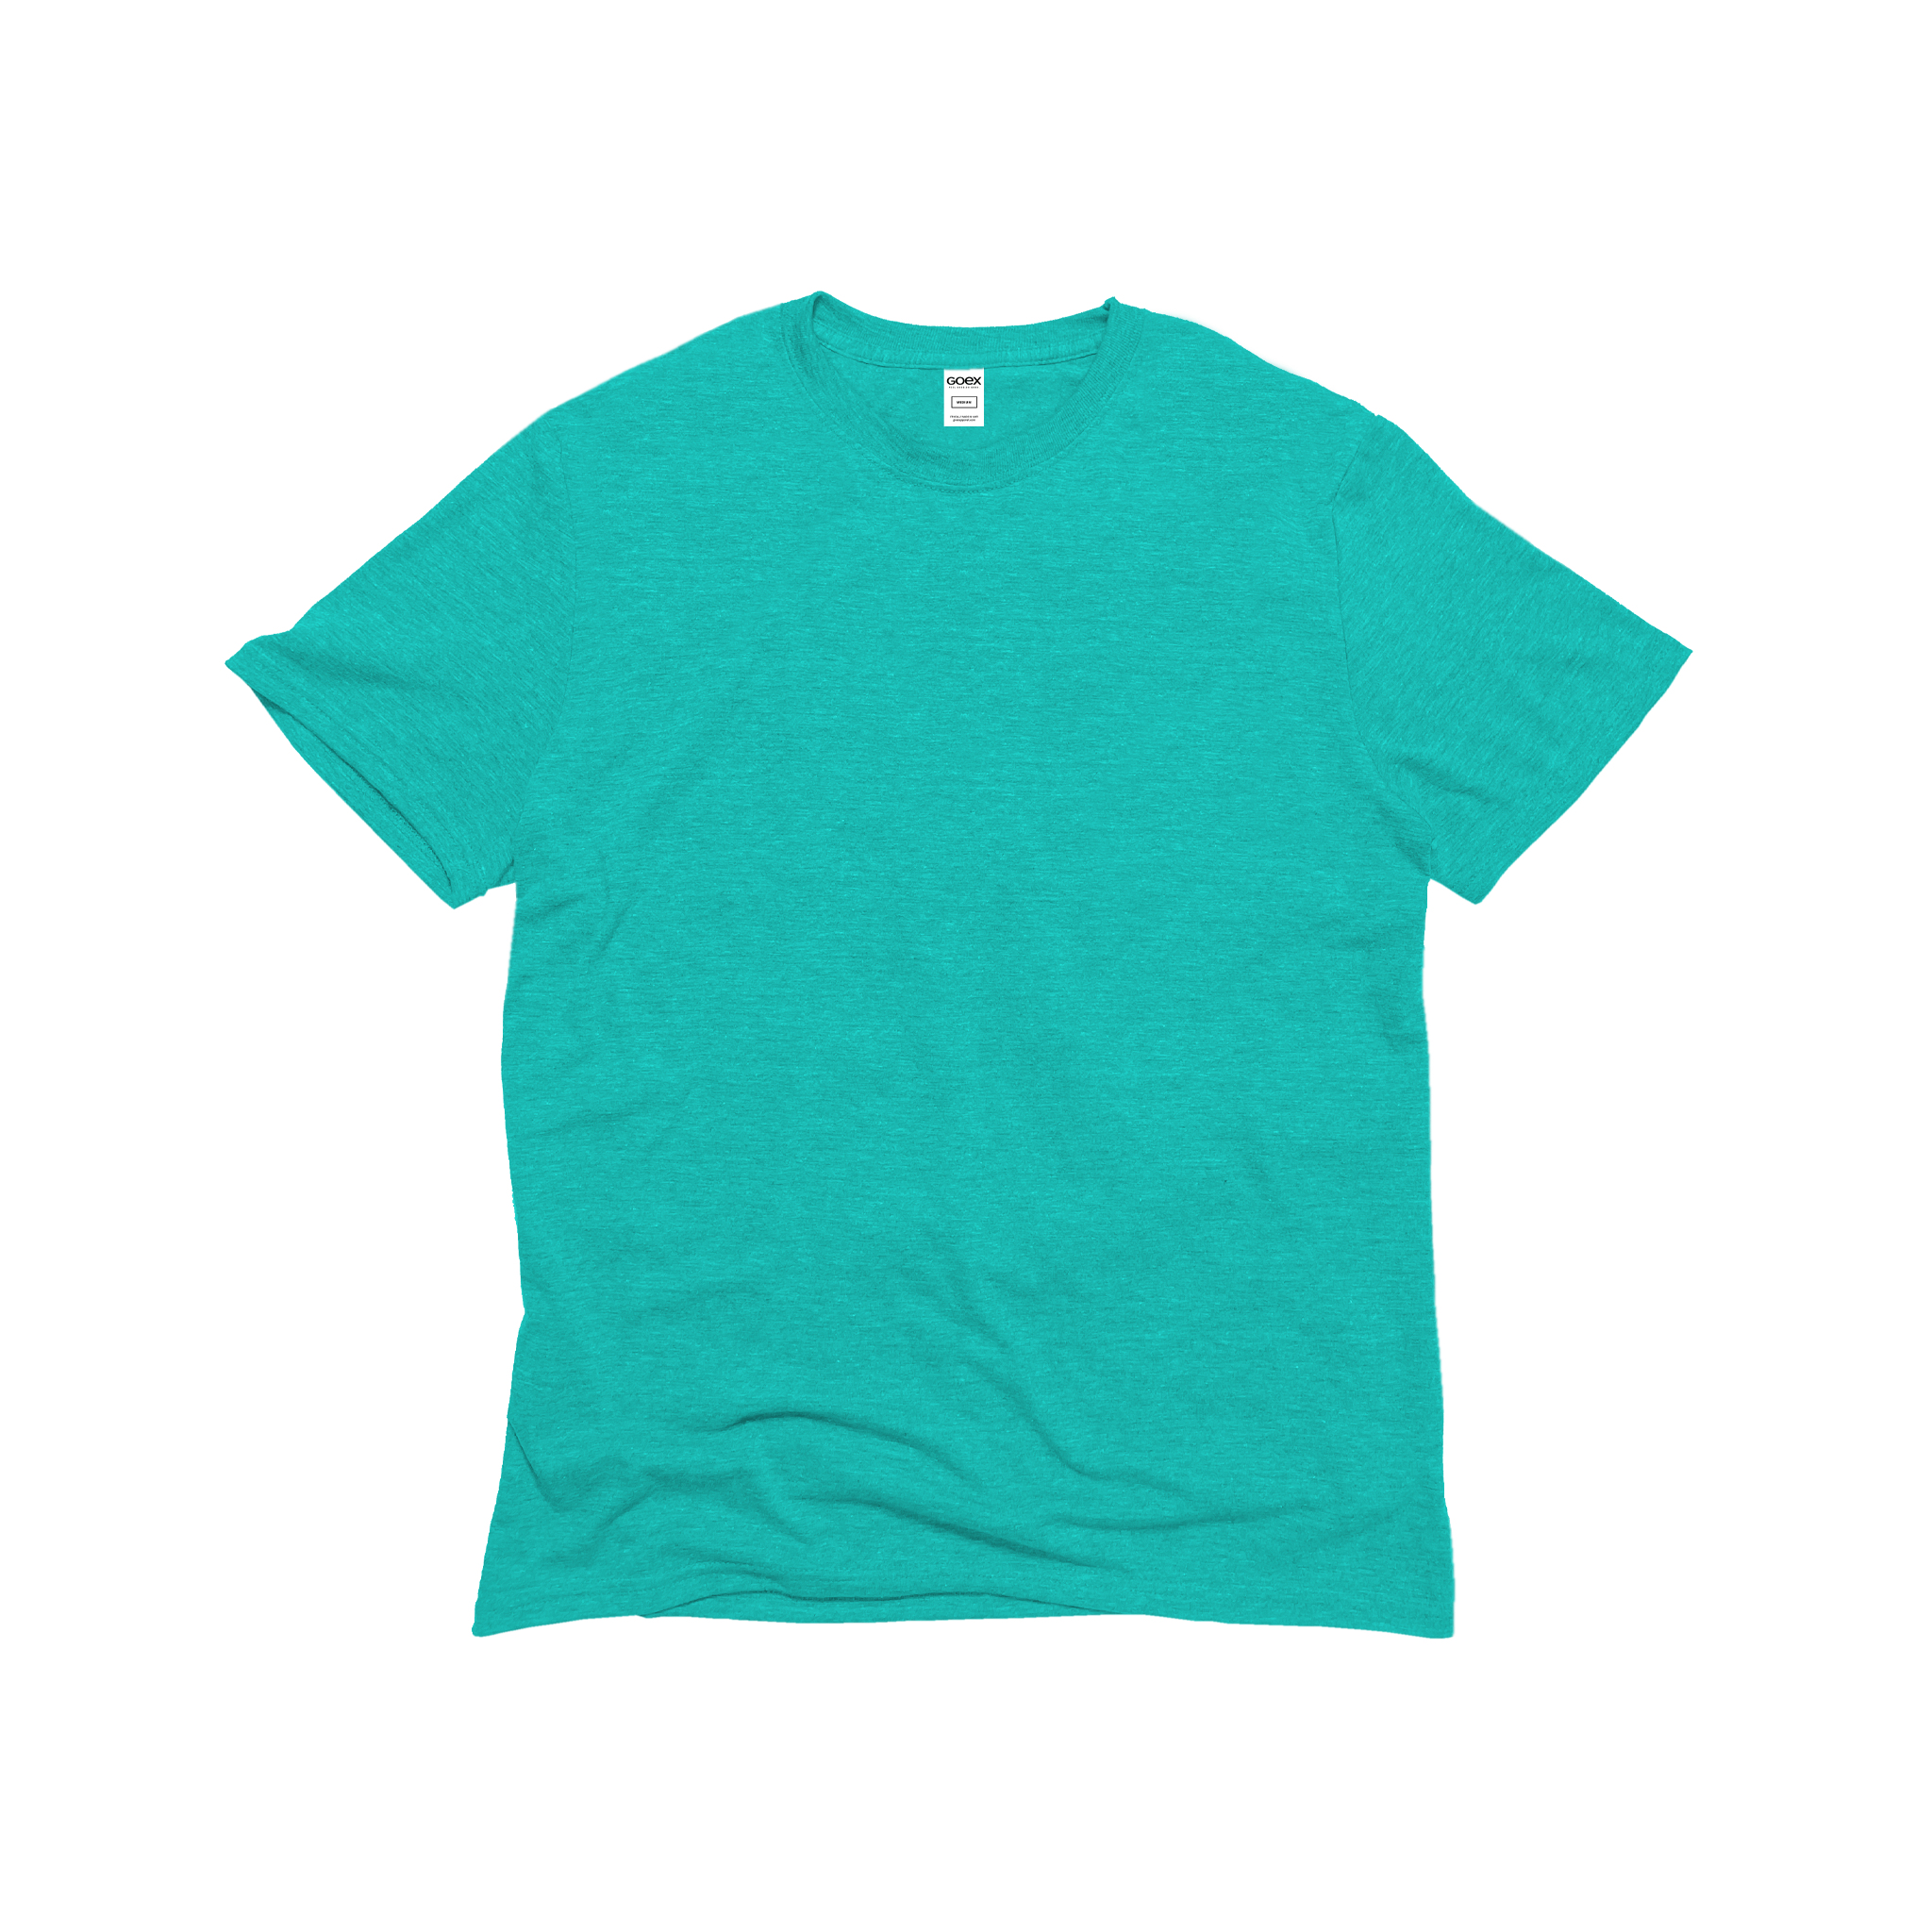 Front Flat Lay of GOEX Unisex and Men's Eco Triblend Tee in Teal